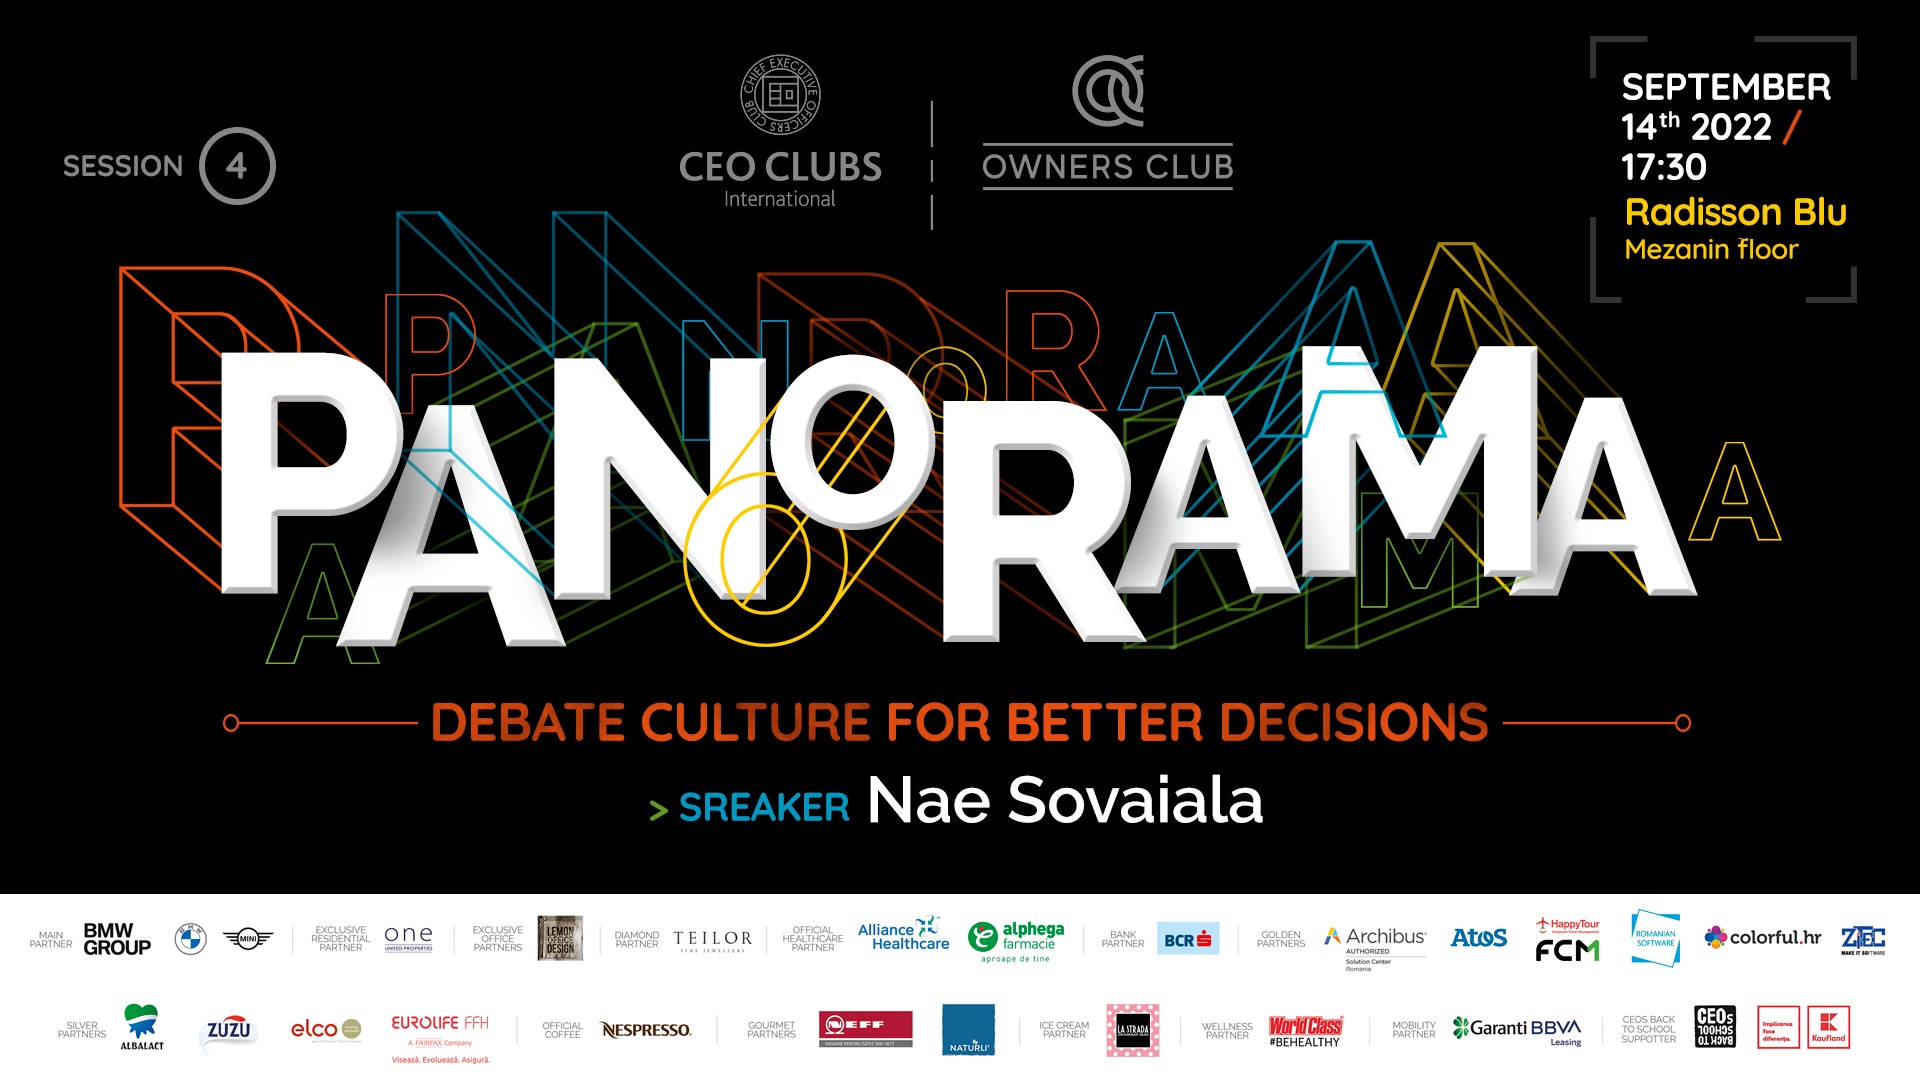 CEO Clubs & Owners Club Panorama: Debate culture for better decisions